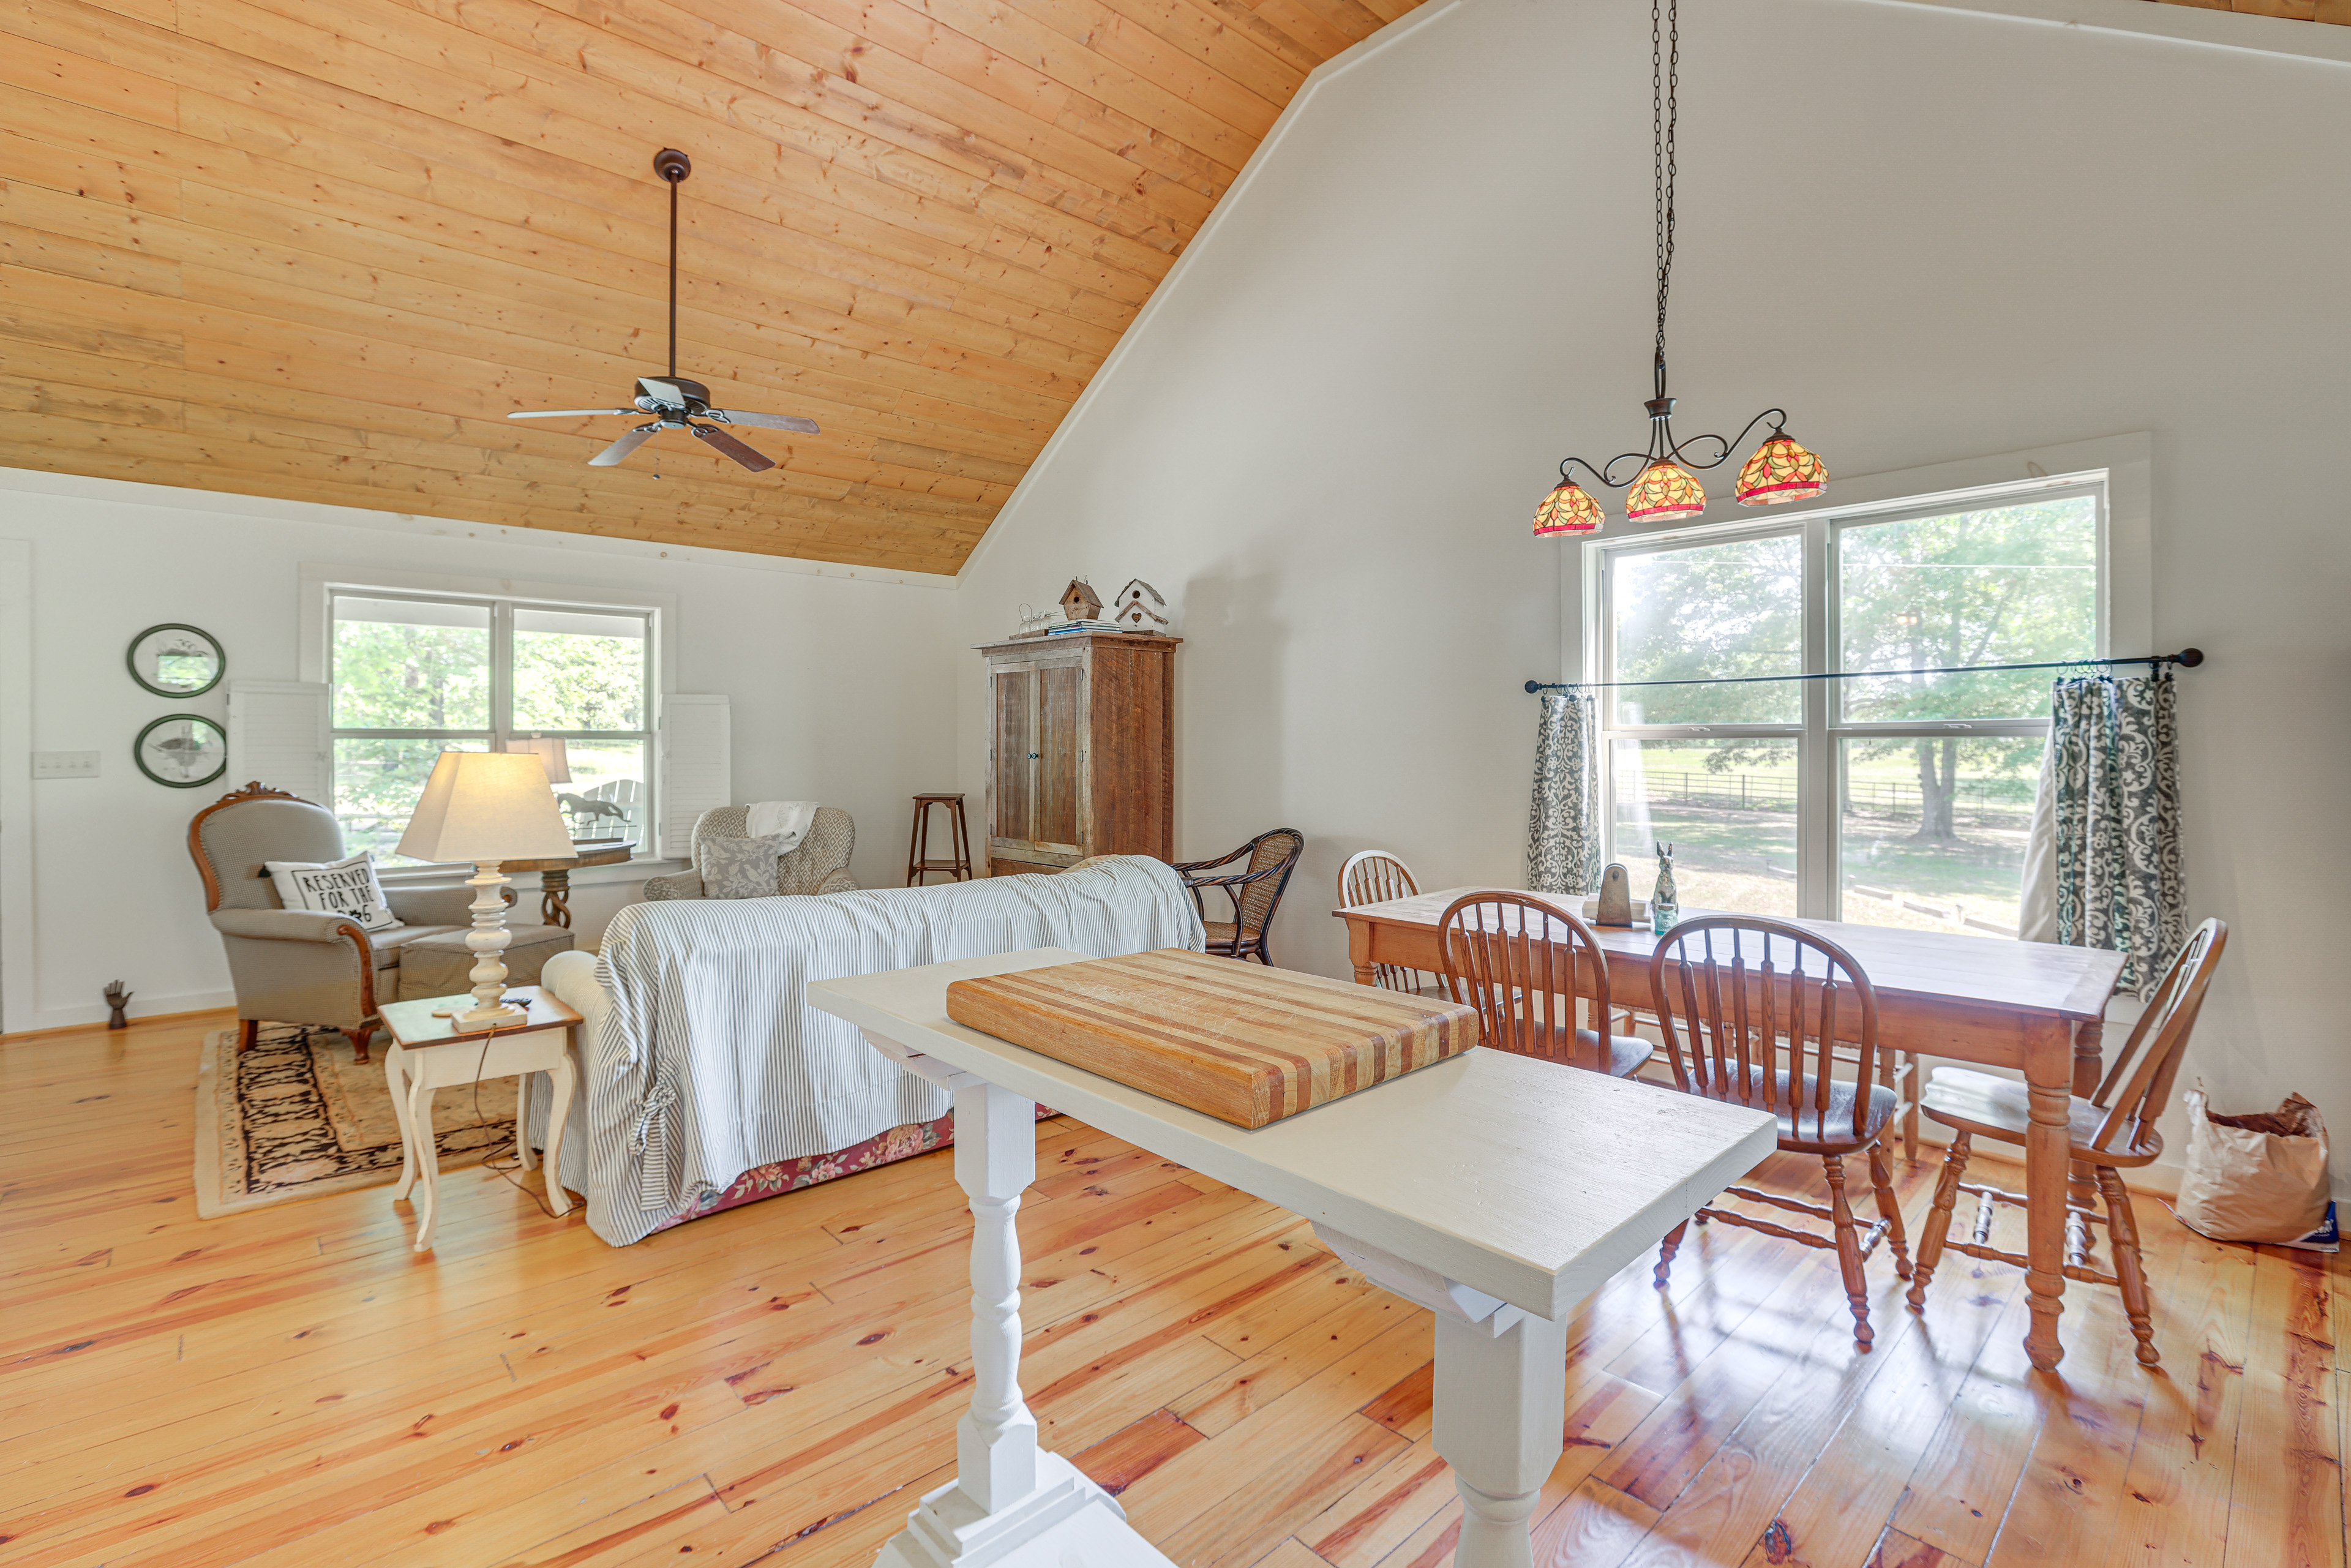 Charming Lawley Cottage: Deck, Fire Pit & Yard!